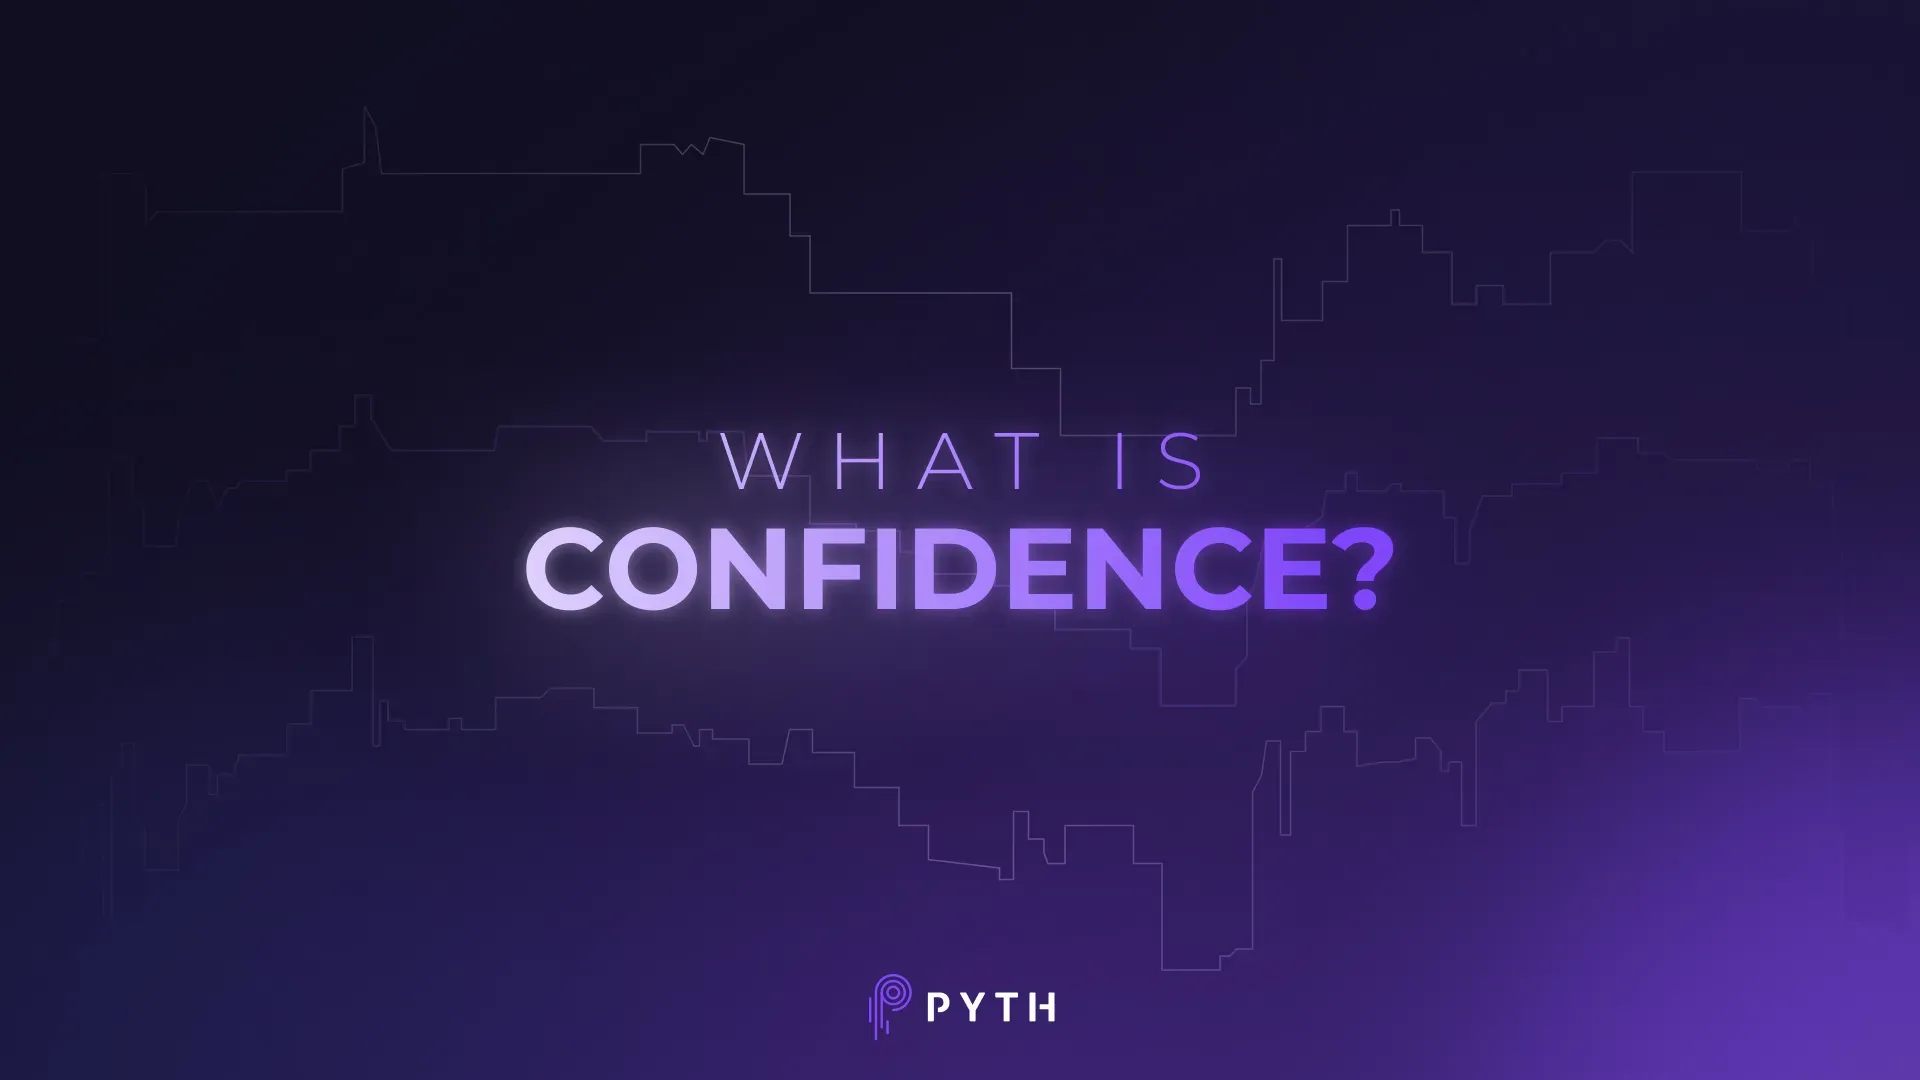 What is Confidence/Uncertainty in a Price?